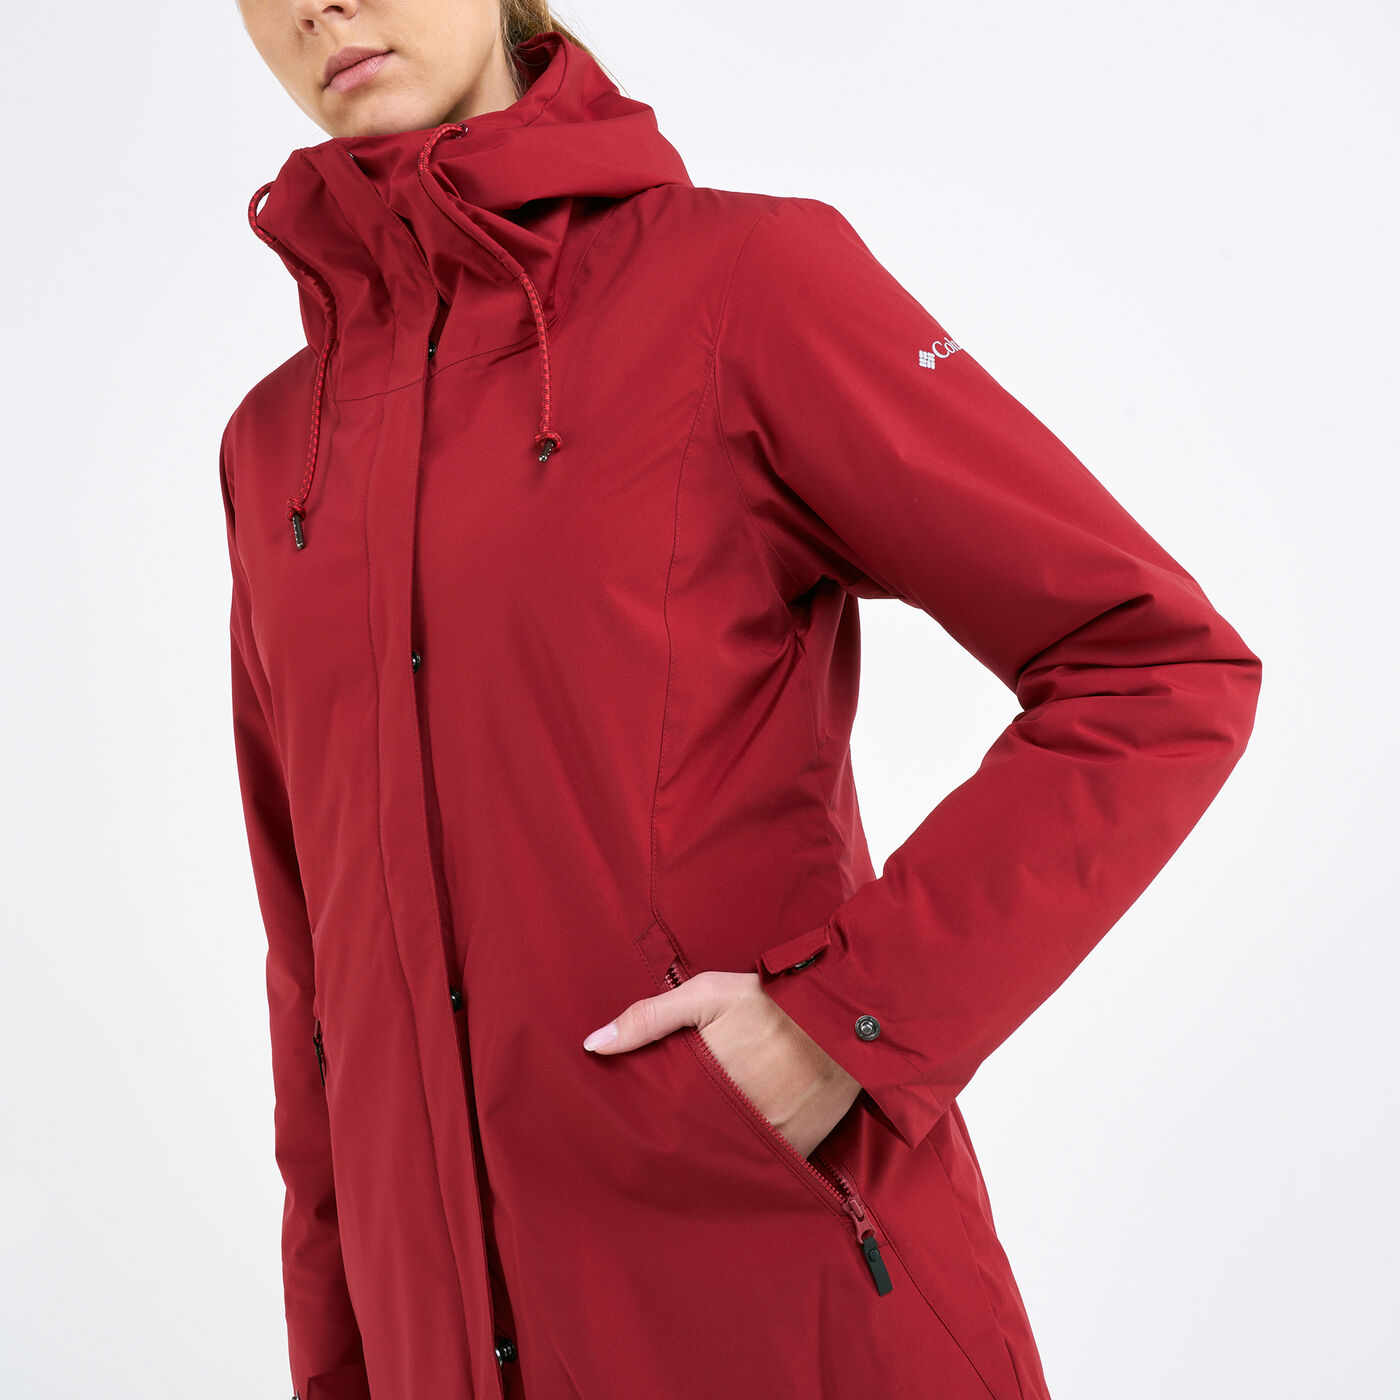 Women's Here and There™ Interchange Jacket